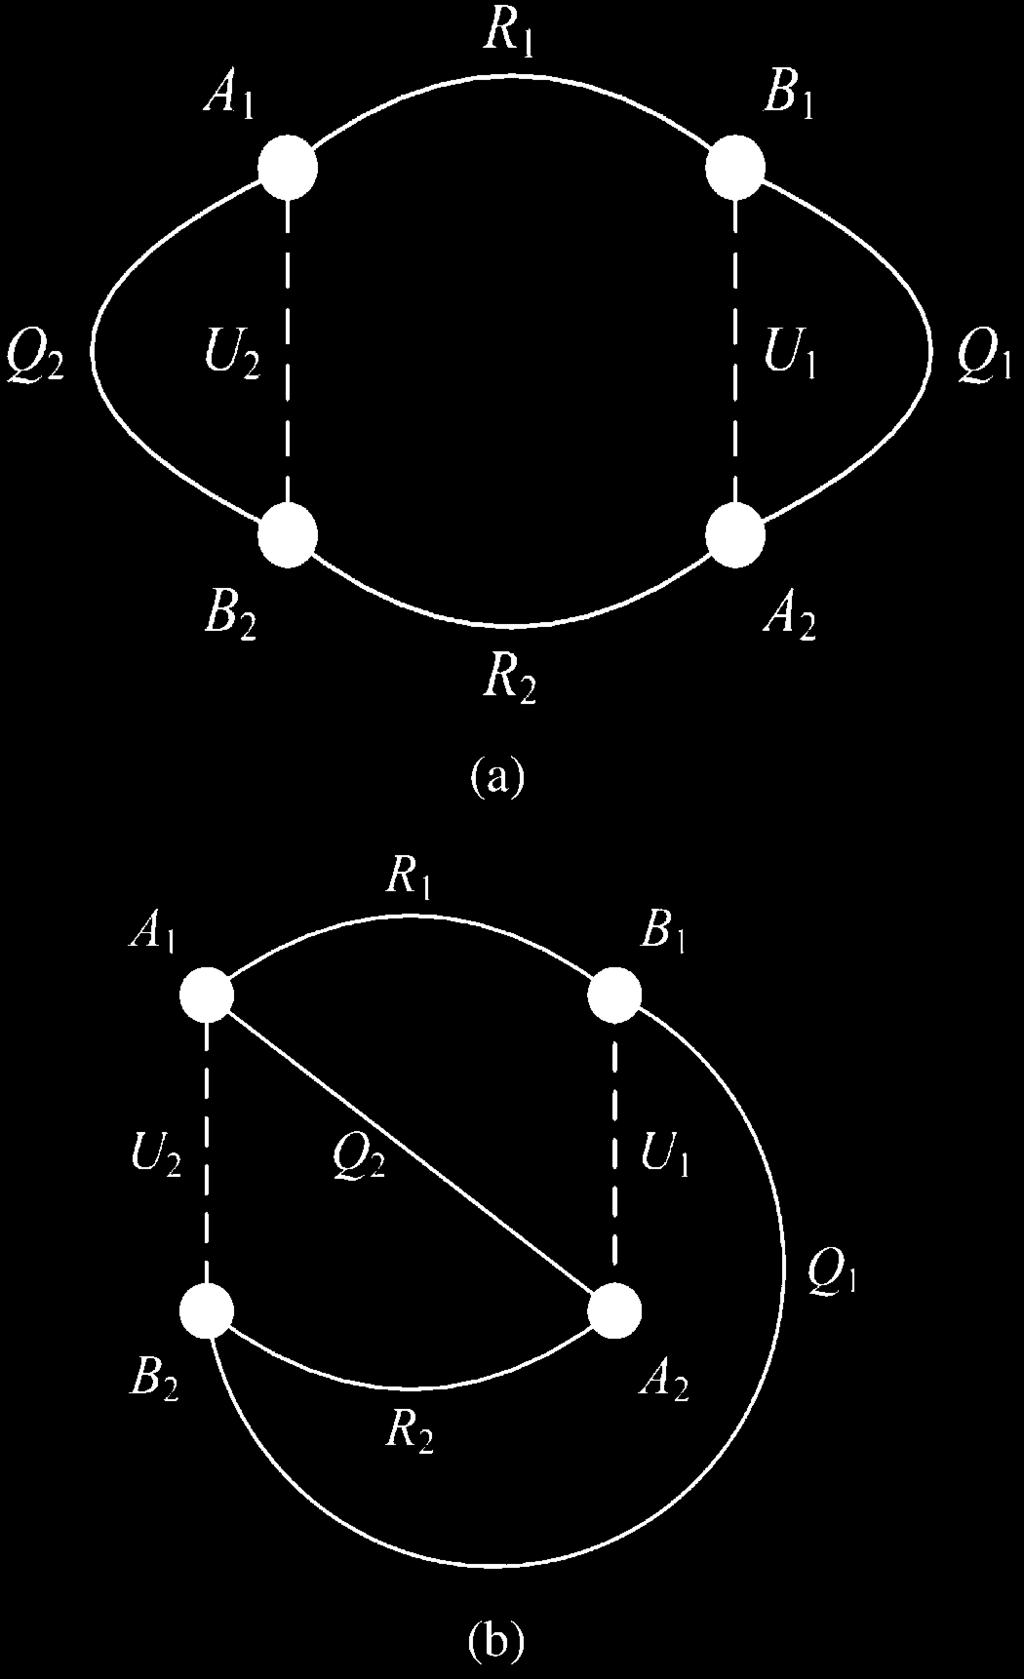 the protograph of girth 2g is obtained, its protograph code could have the girth larger than or equal to 6g by choosing the appropriate shift values of circulants Note that the results in this